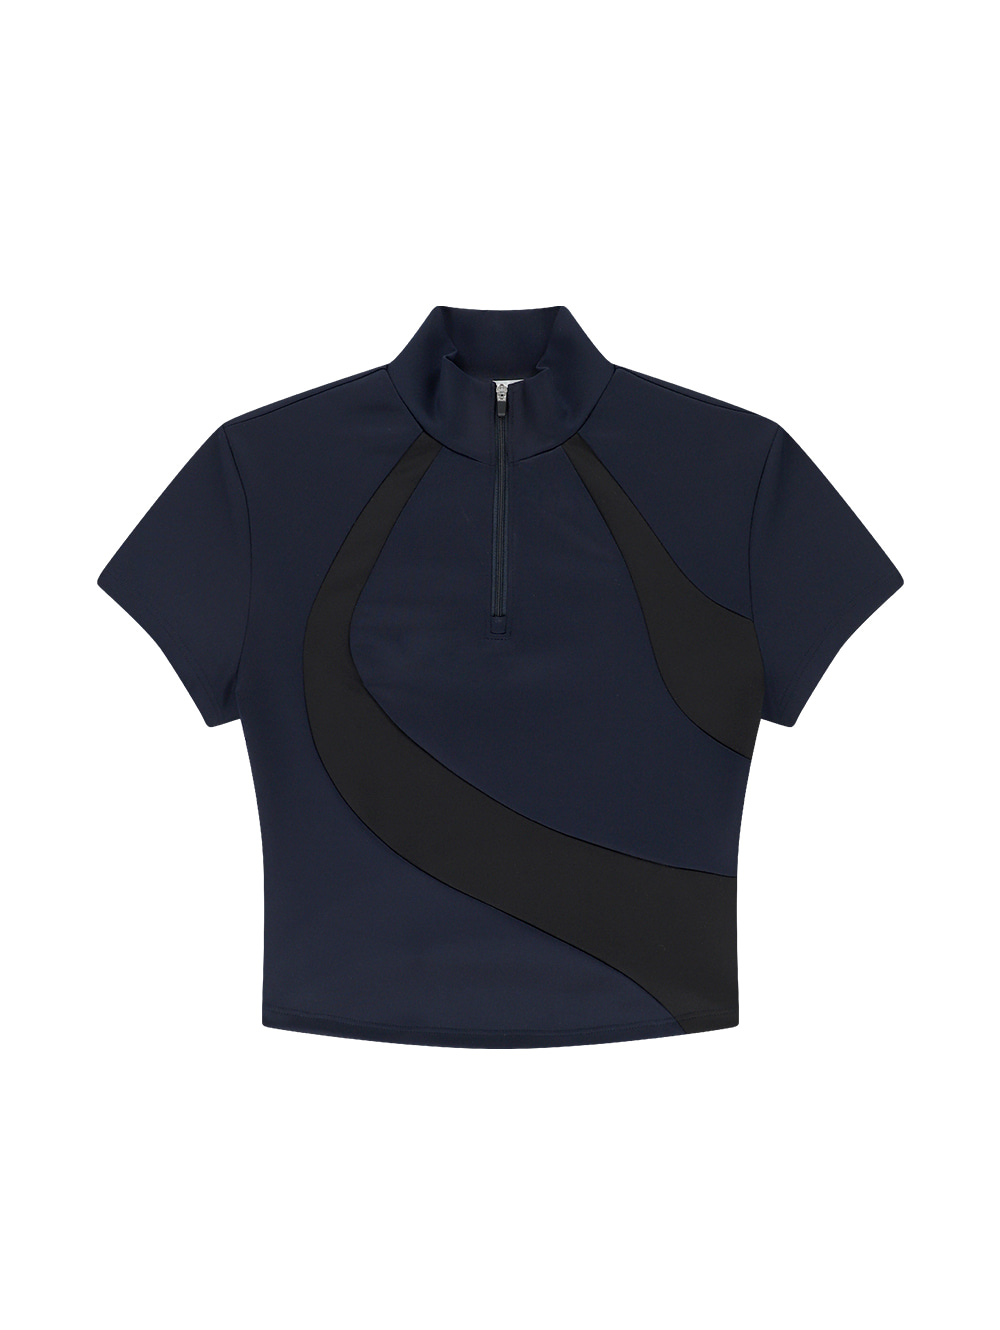 CURVED RACING TOP [NAVY]